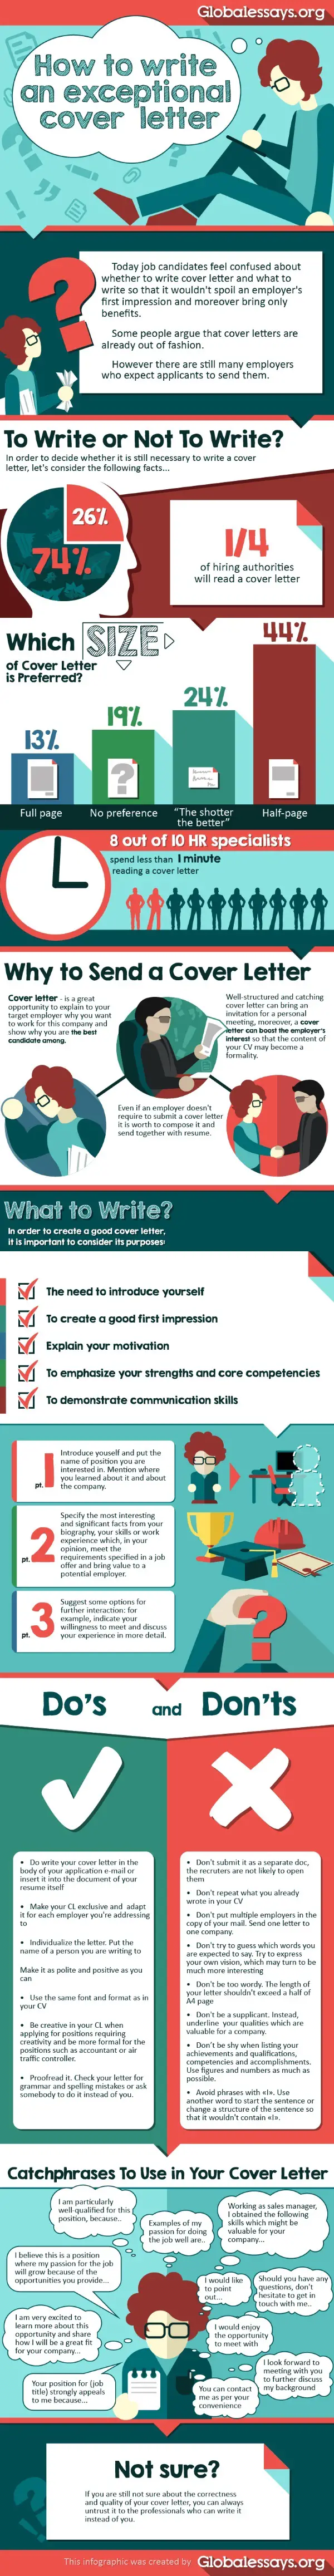 tips to write an exceptional cover letter cheat sheet